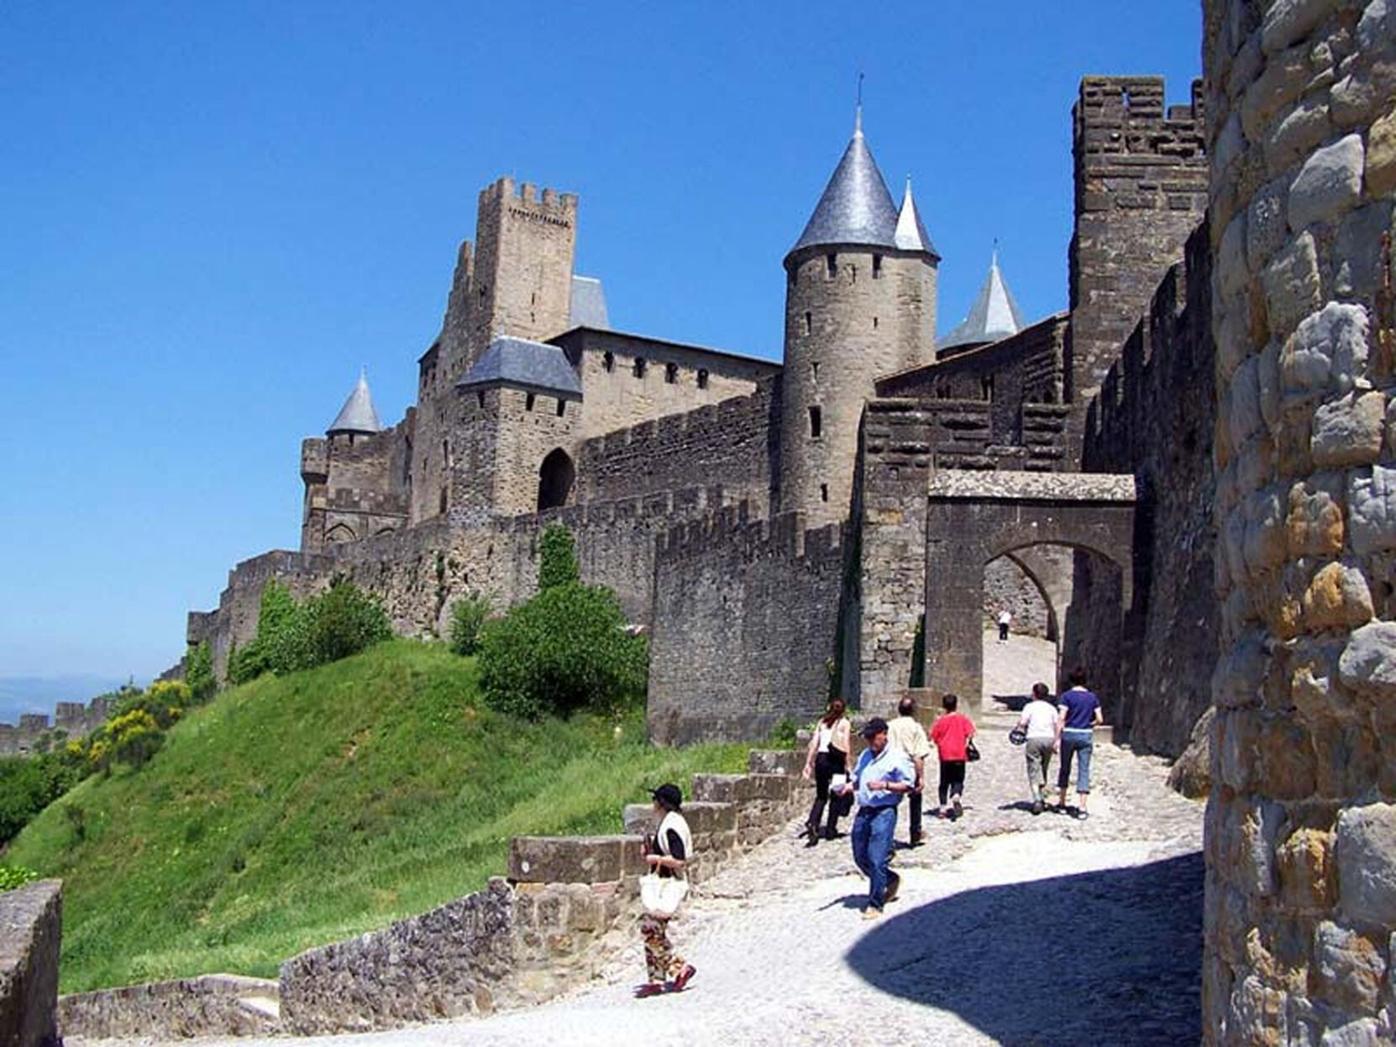 30 Must-See European Fortresses, Forts and Fortified Towns - KarsTravels